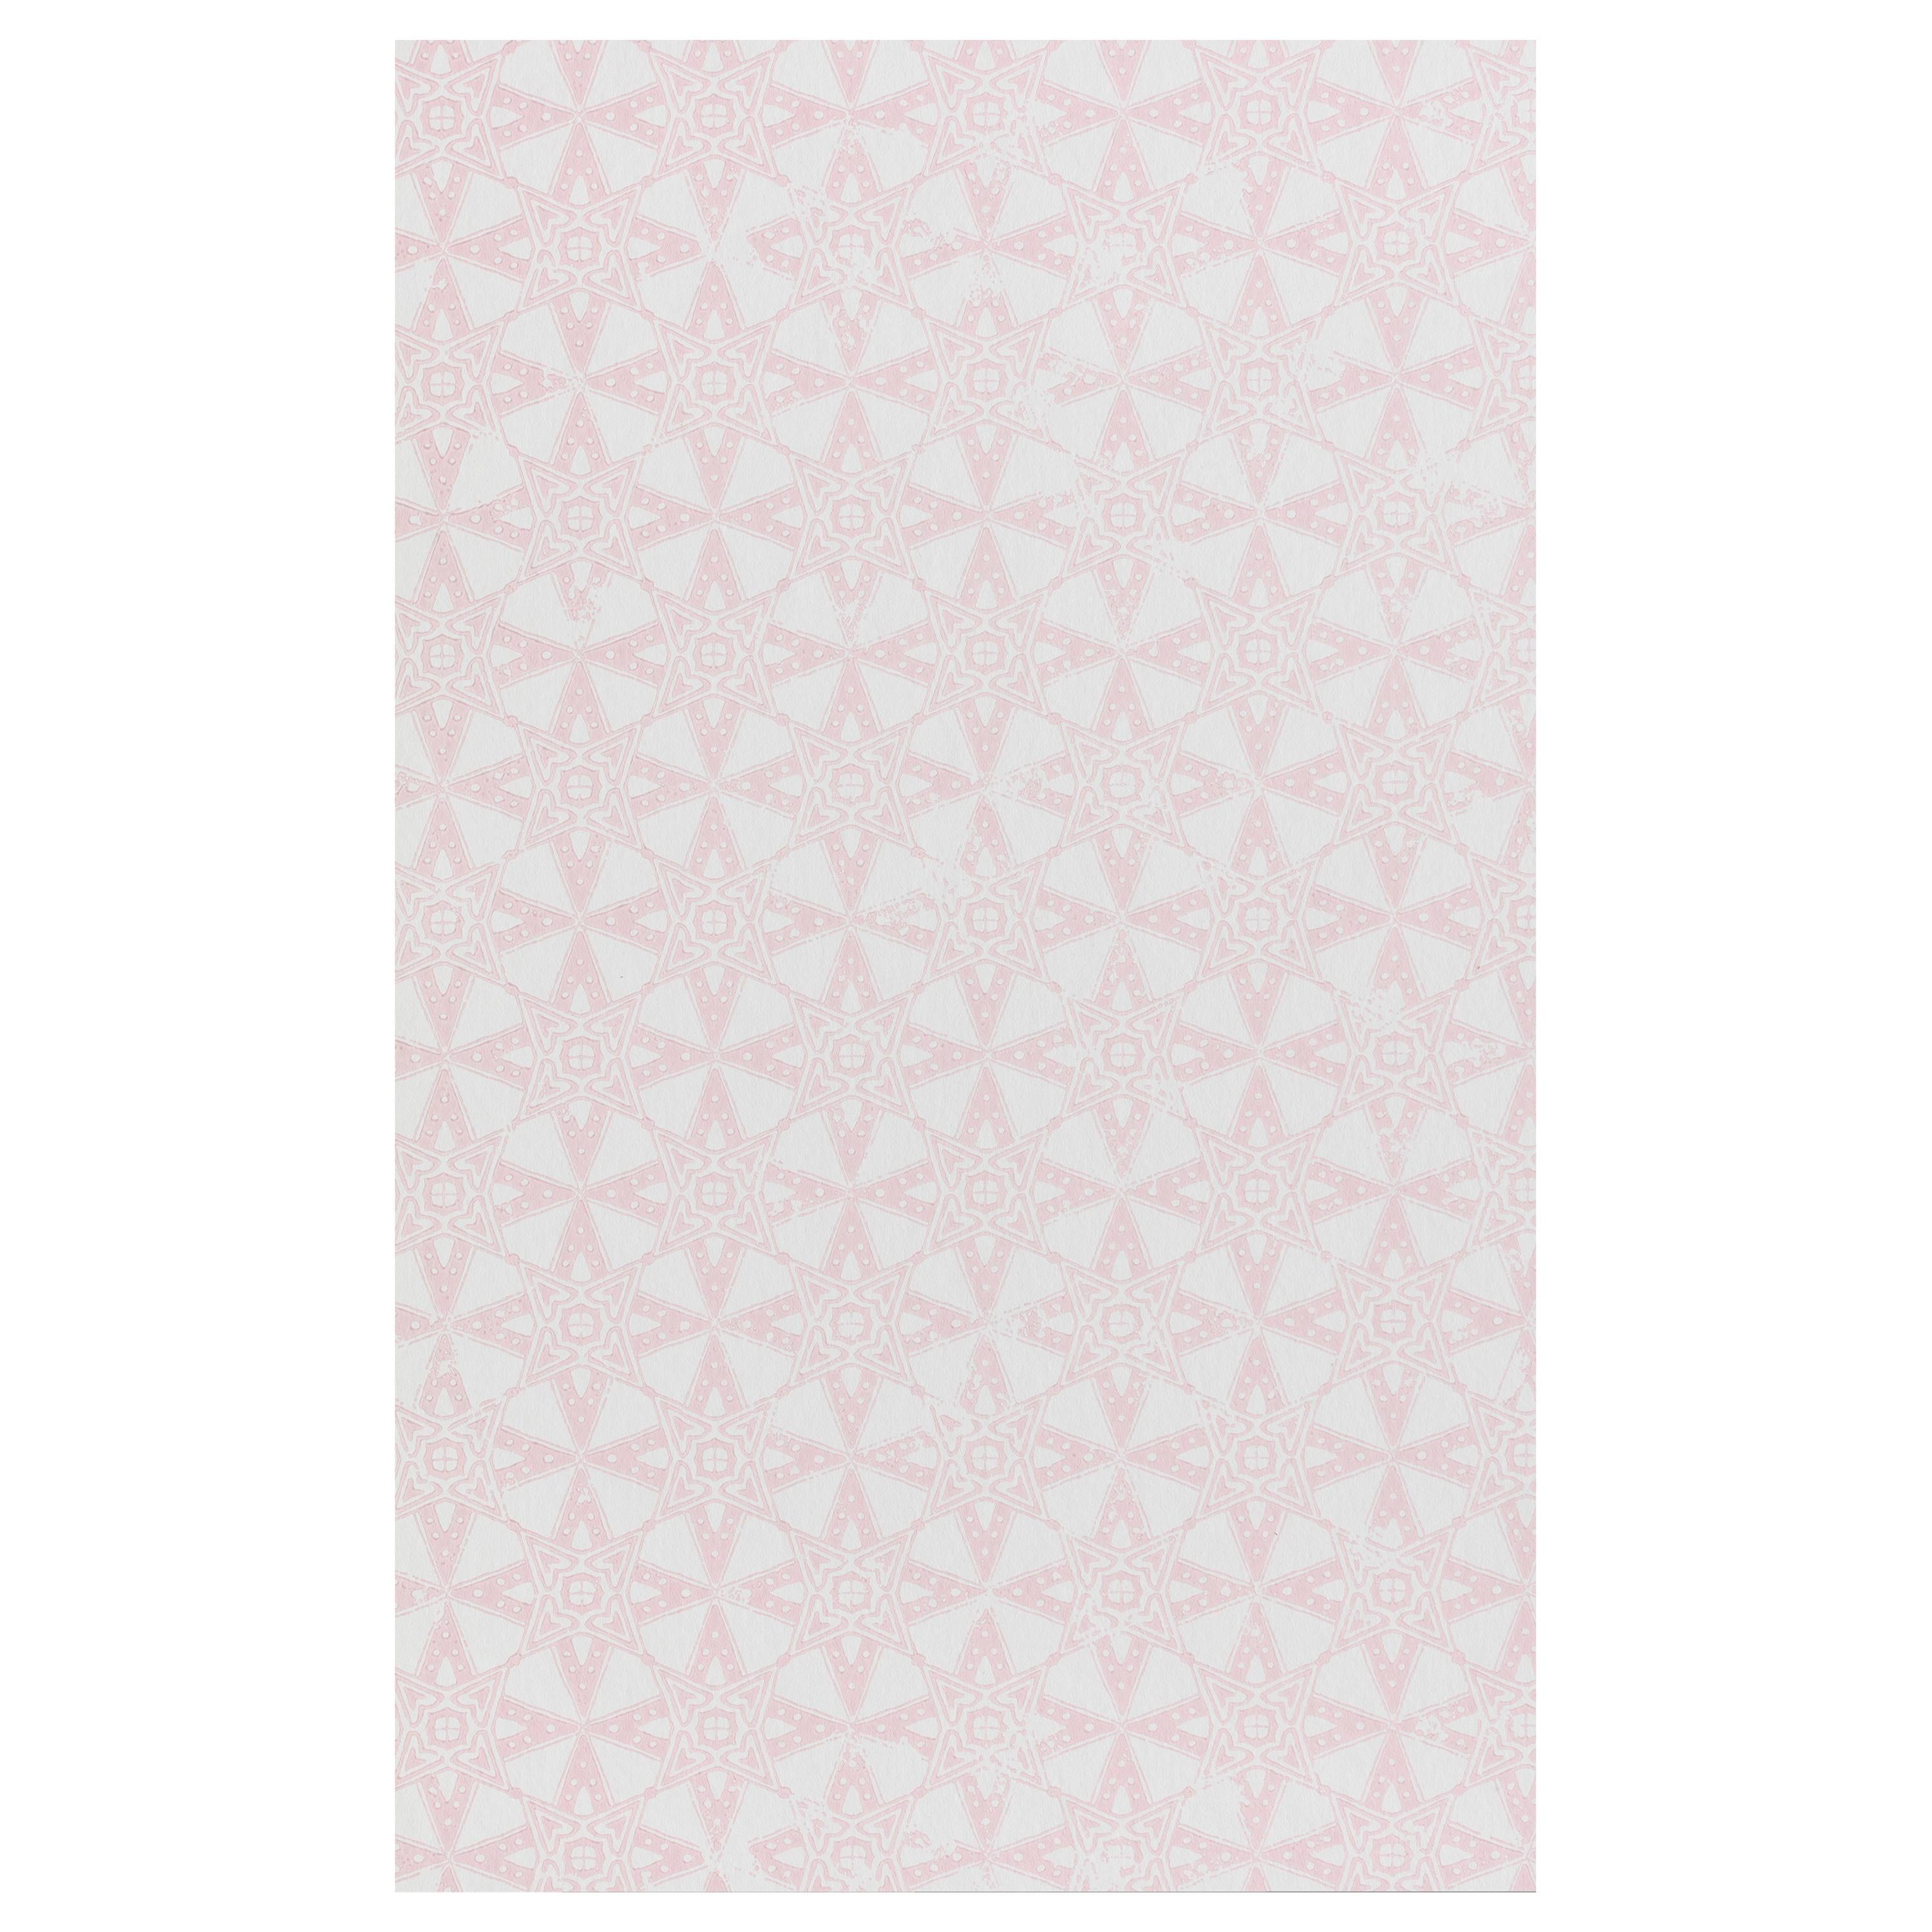 'Star Tile' Contemporary, Traditional Wallpaper in Pink For Sale